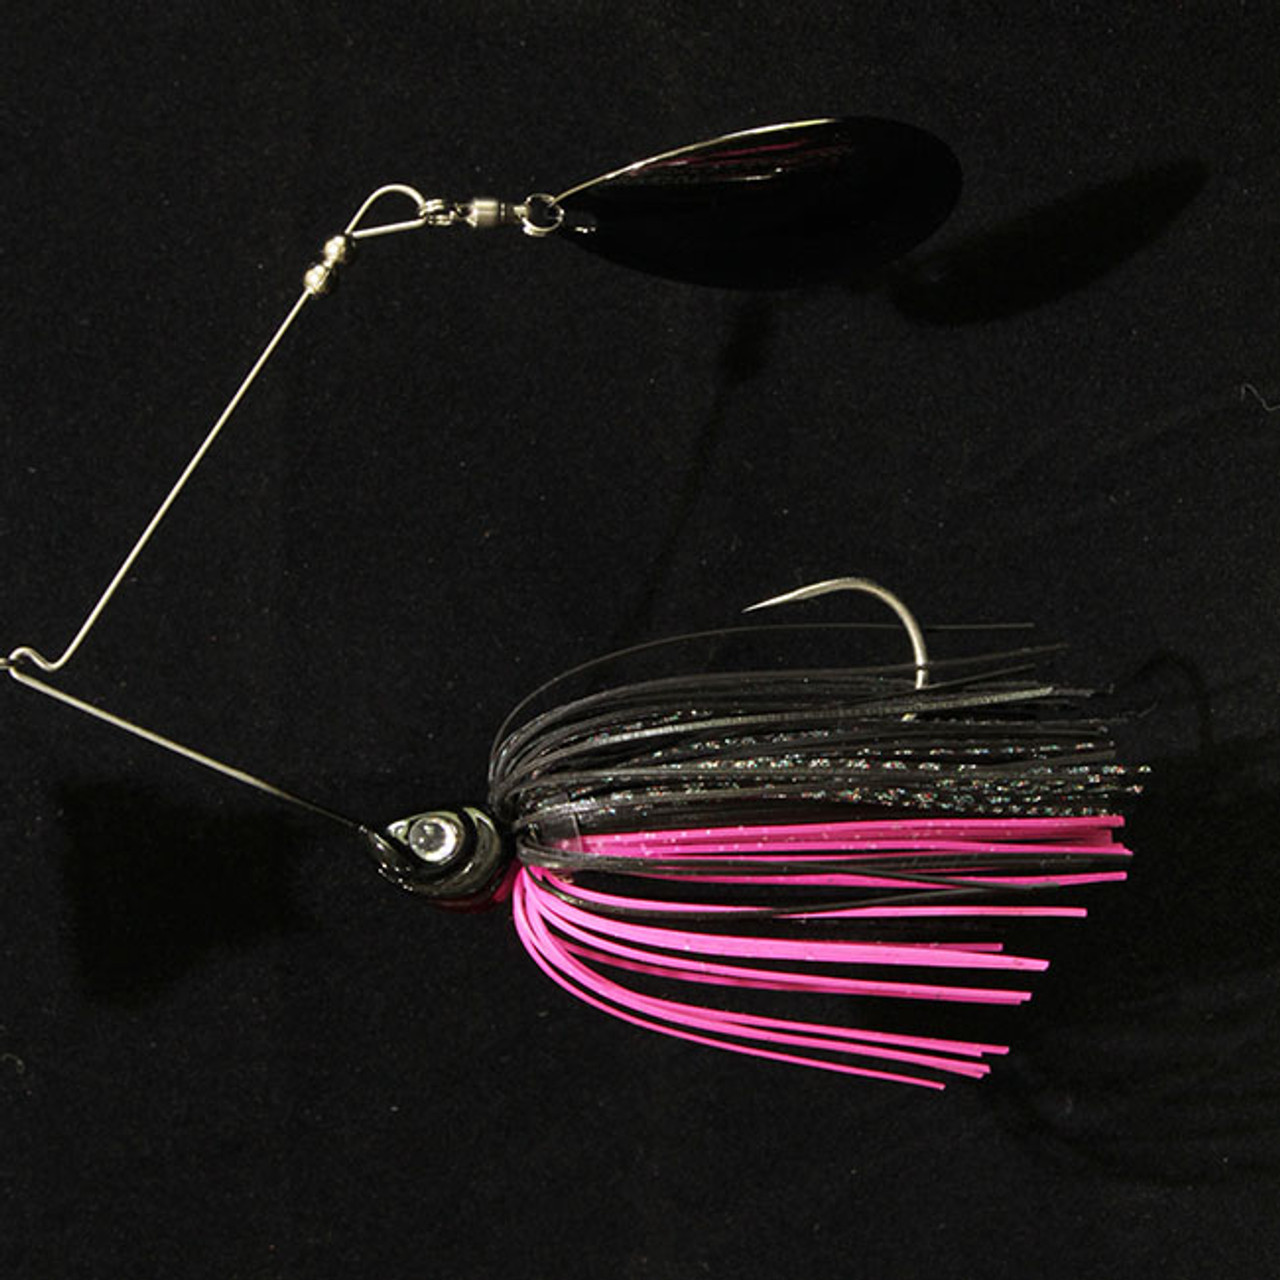 Affordable: Blade & vibration baits / Spinning 